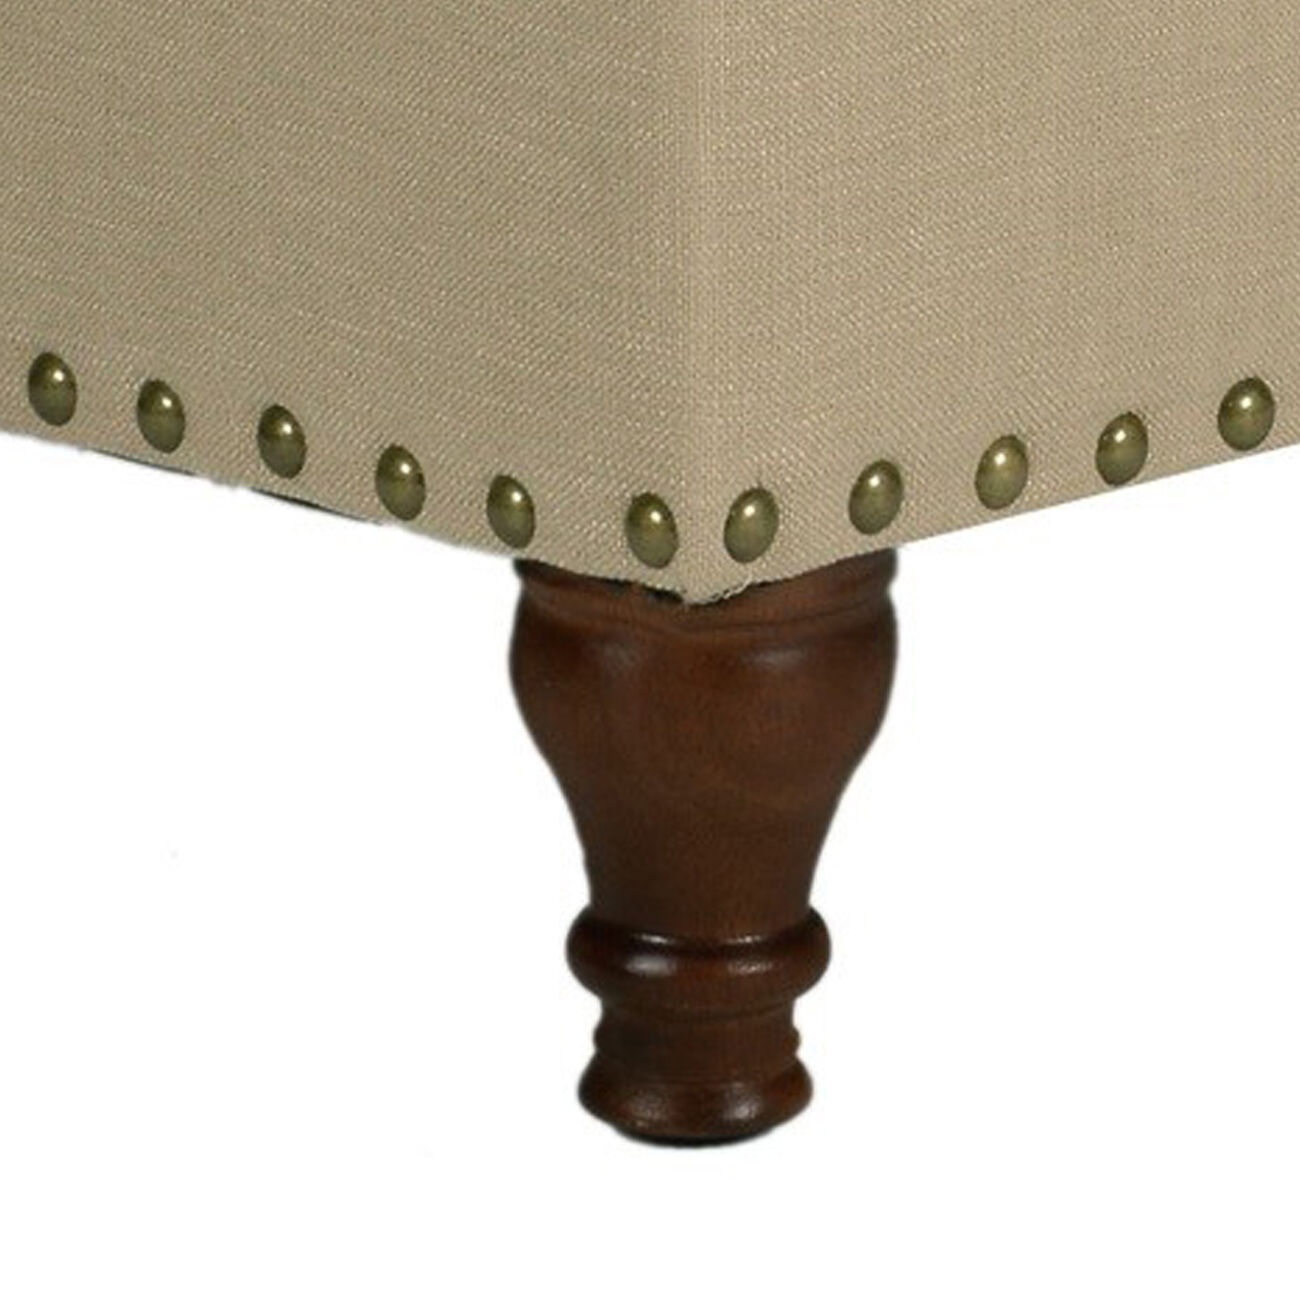 Fabric Upholstered Wooden Storage Bench With Nail head Trim, Large, Beige and Brown